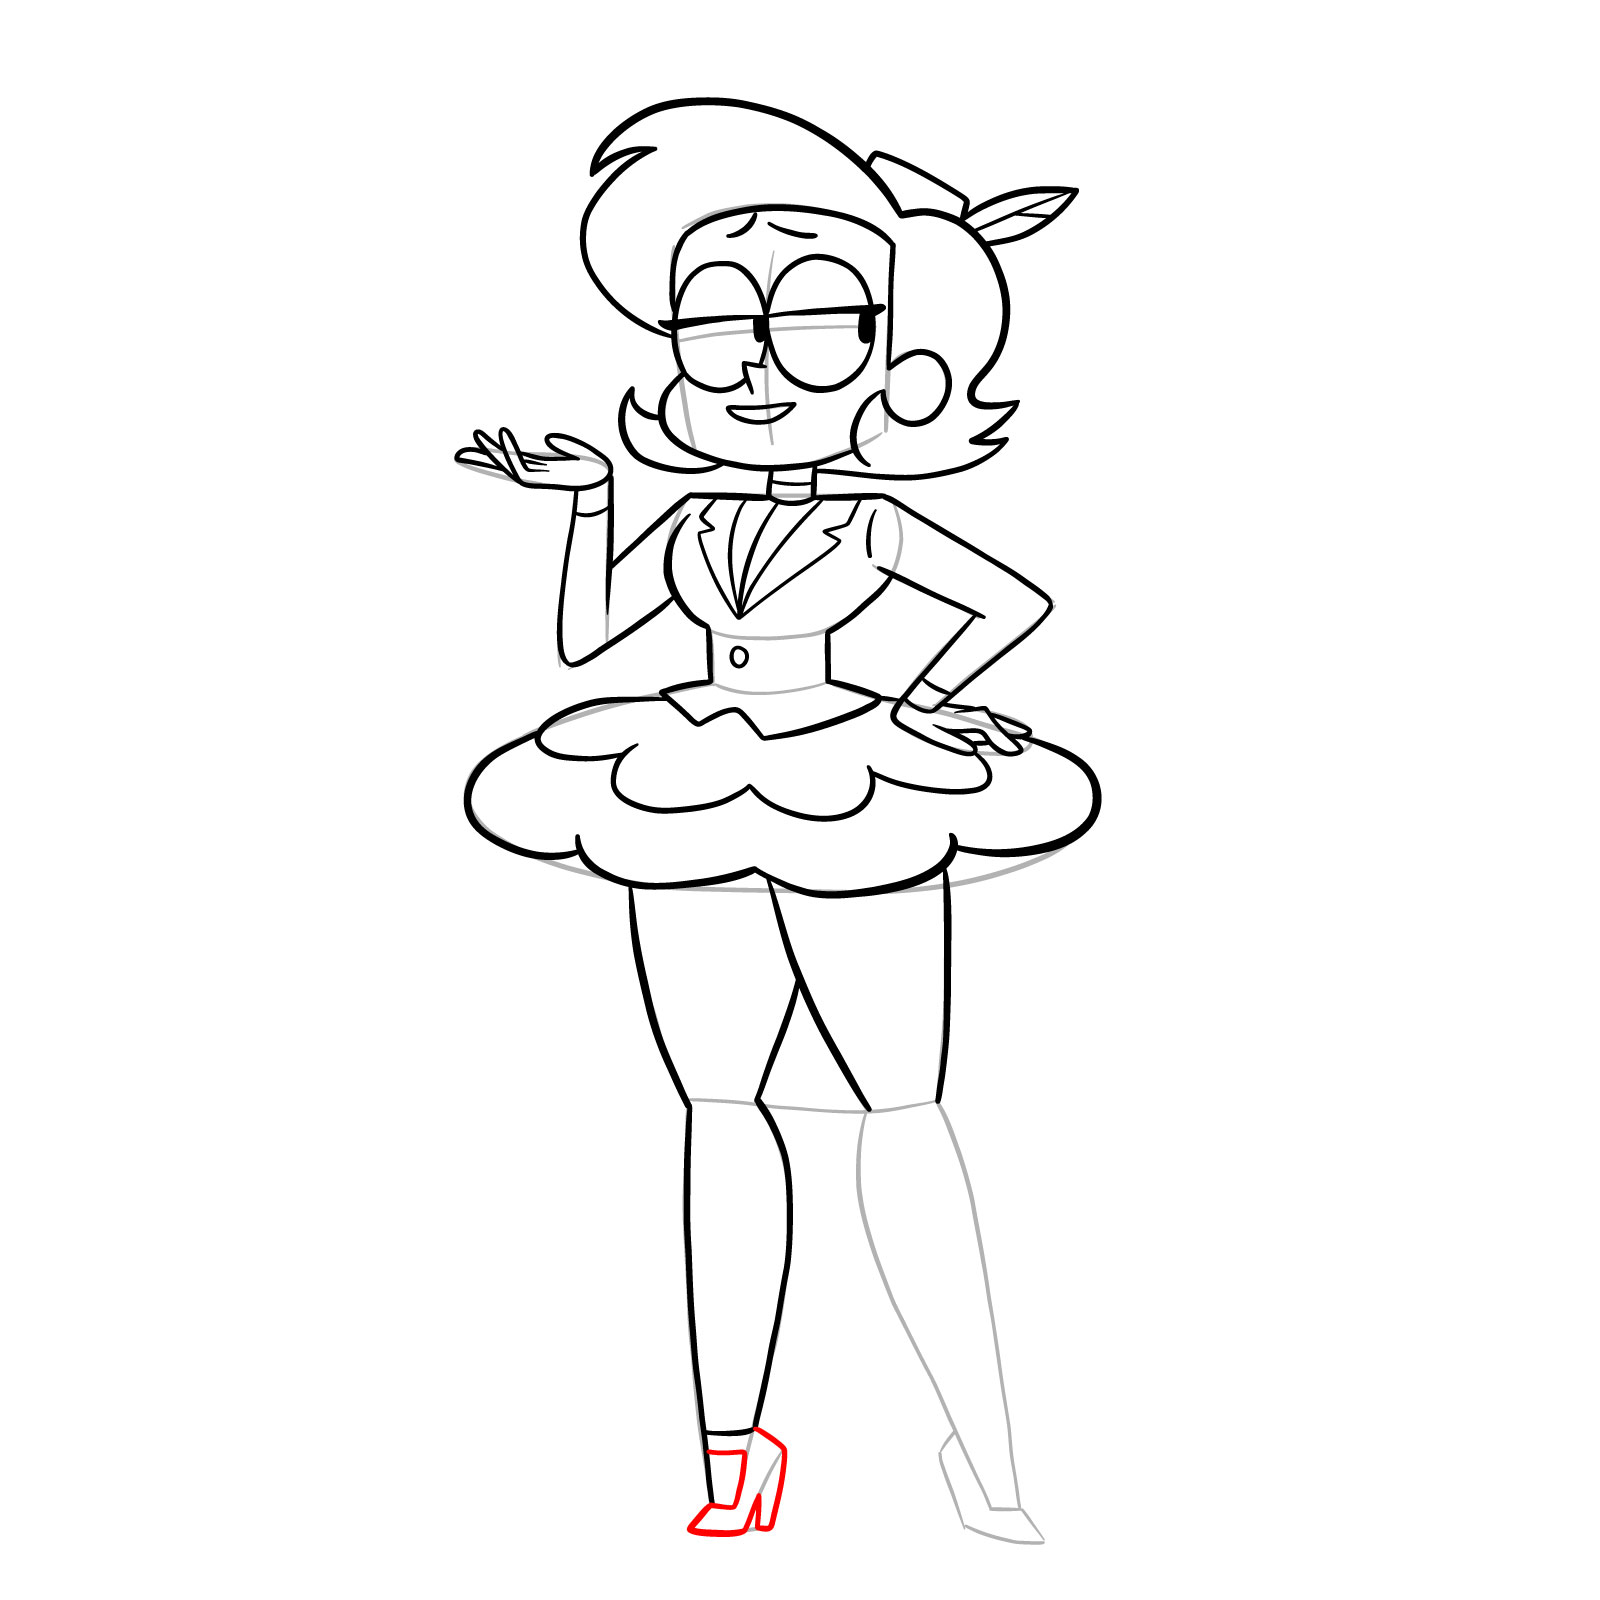 How to draw Elodie from OK K.O.! - step 33